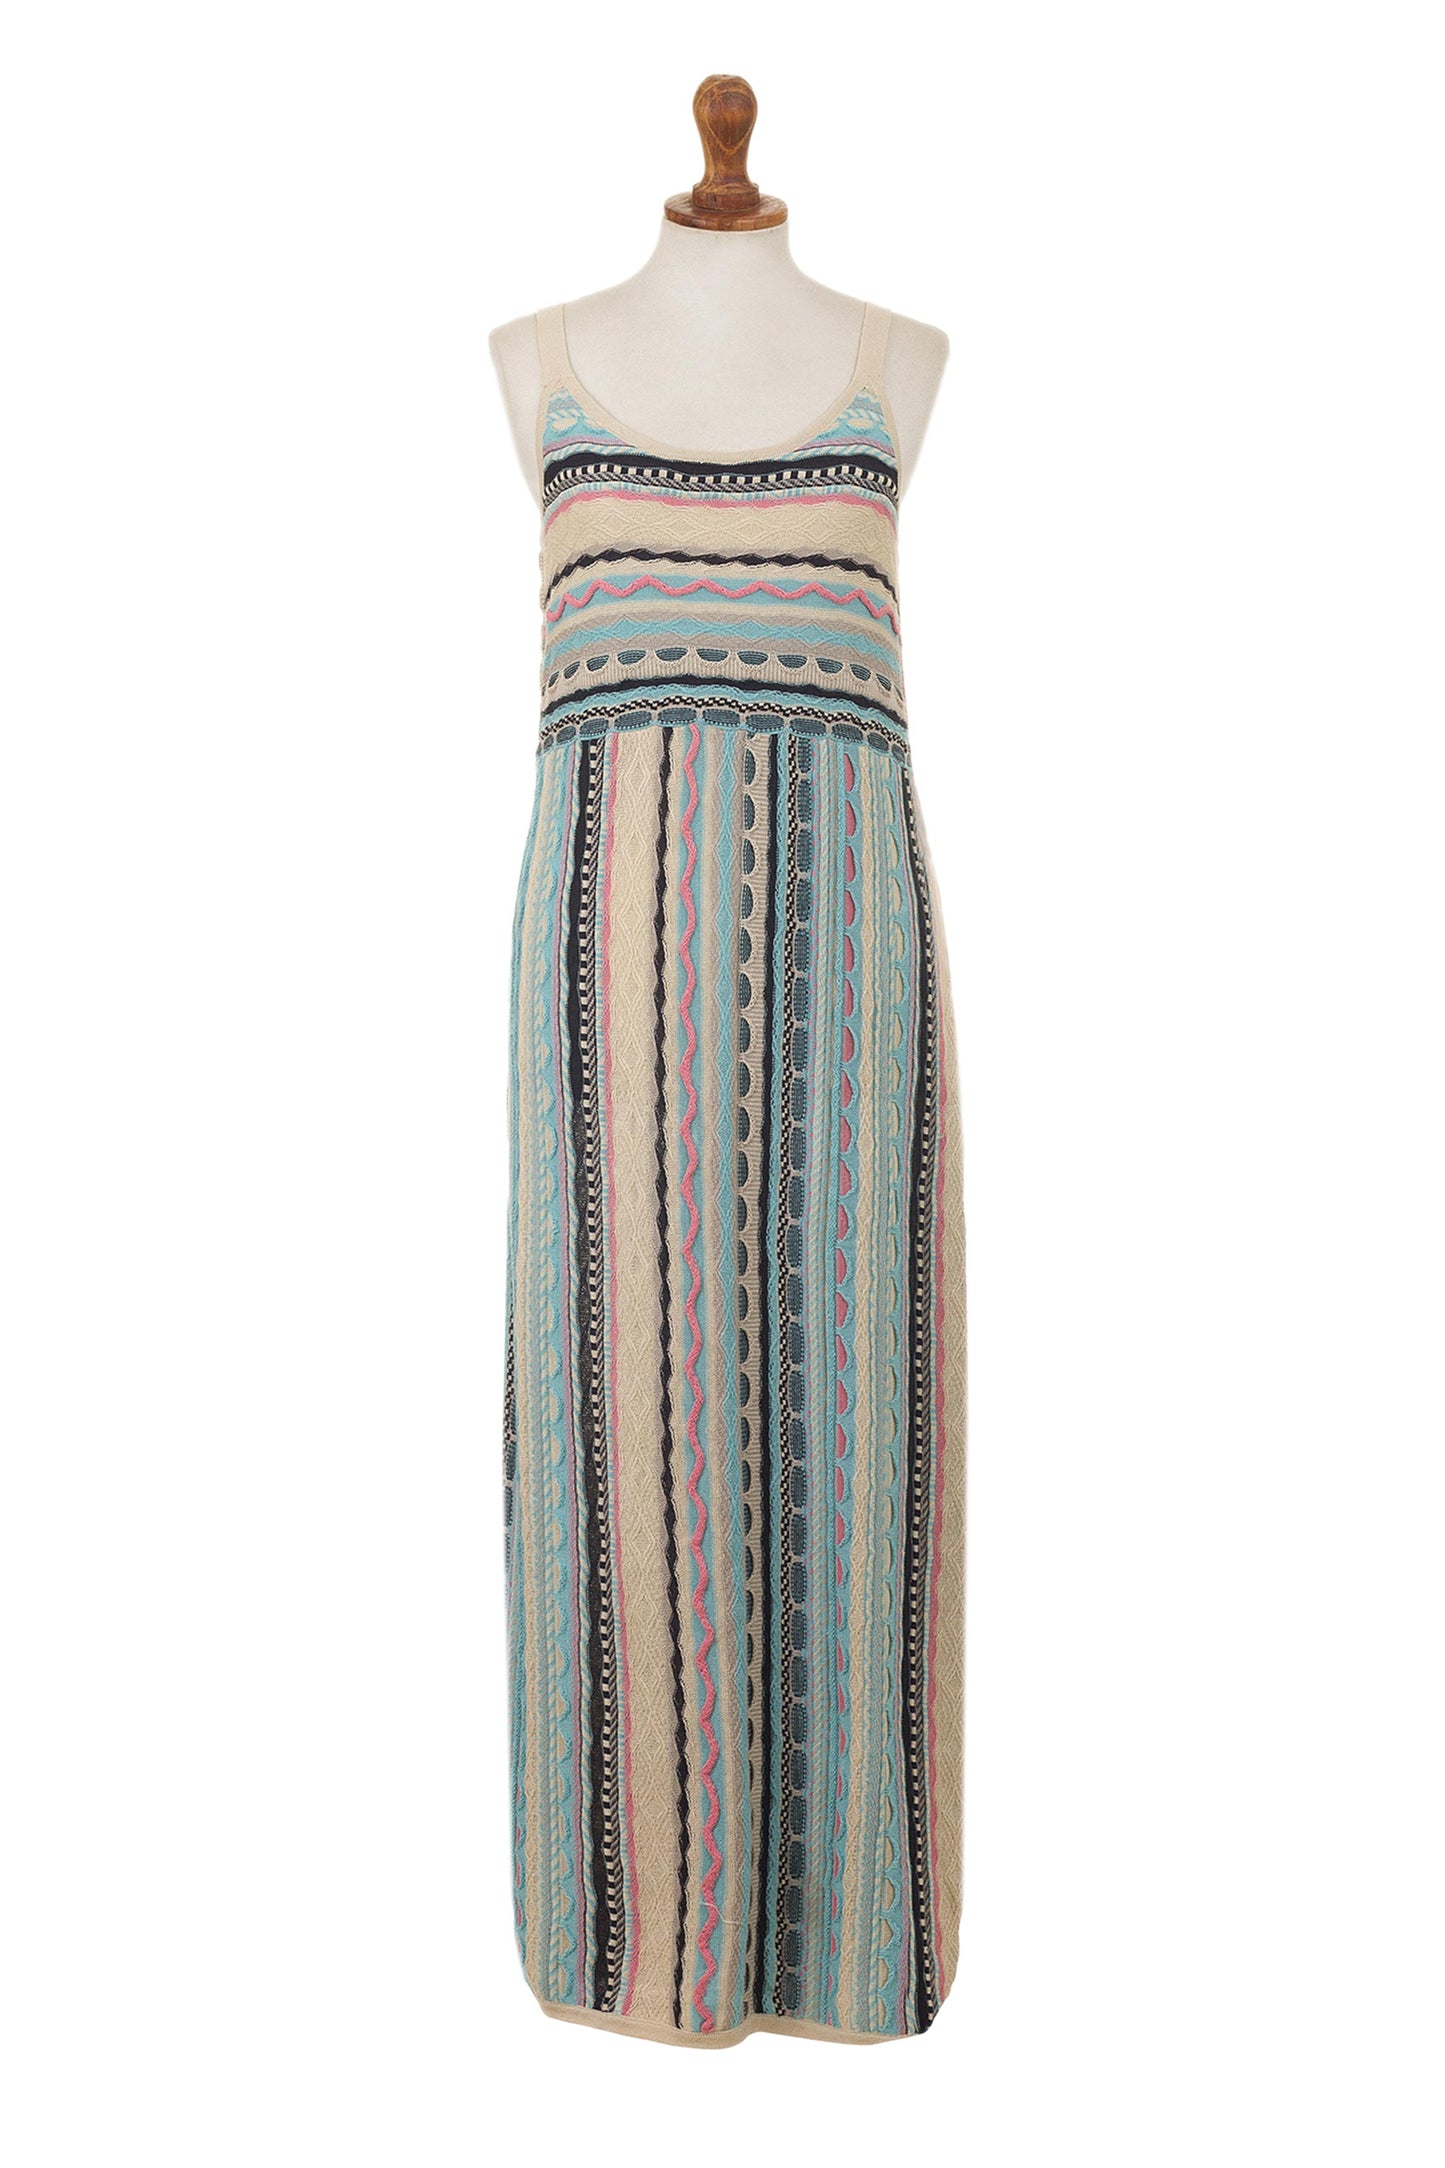 Bohemian Princess Cotton Knit Maxi Dress in Ivory and Pastel Stripes